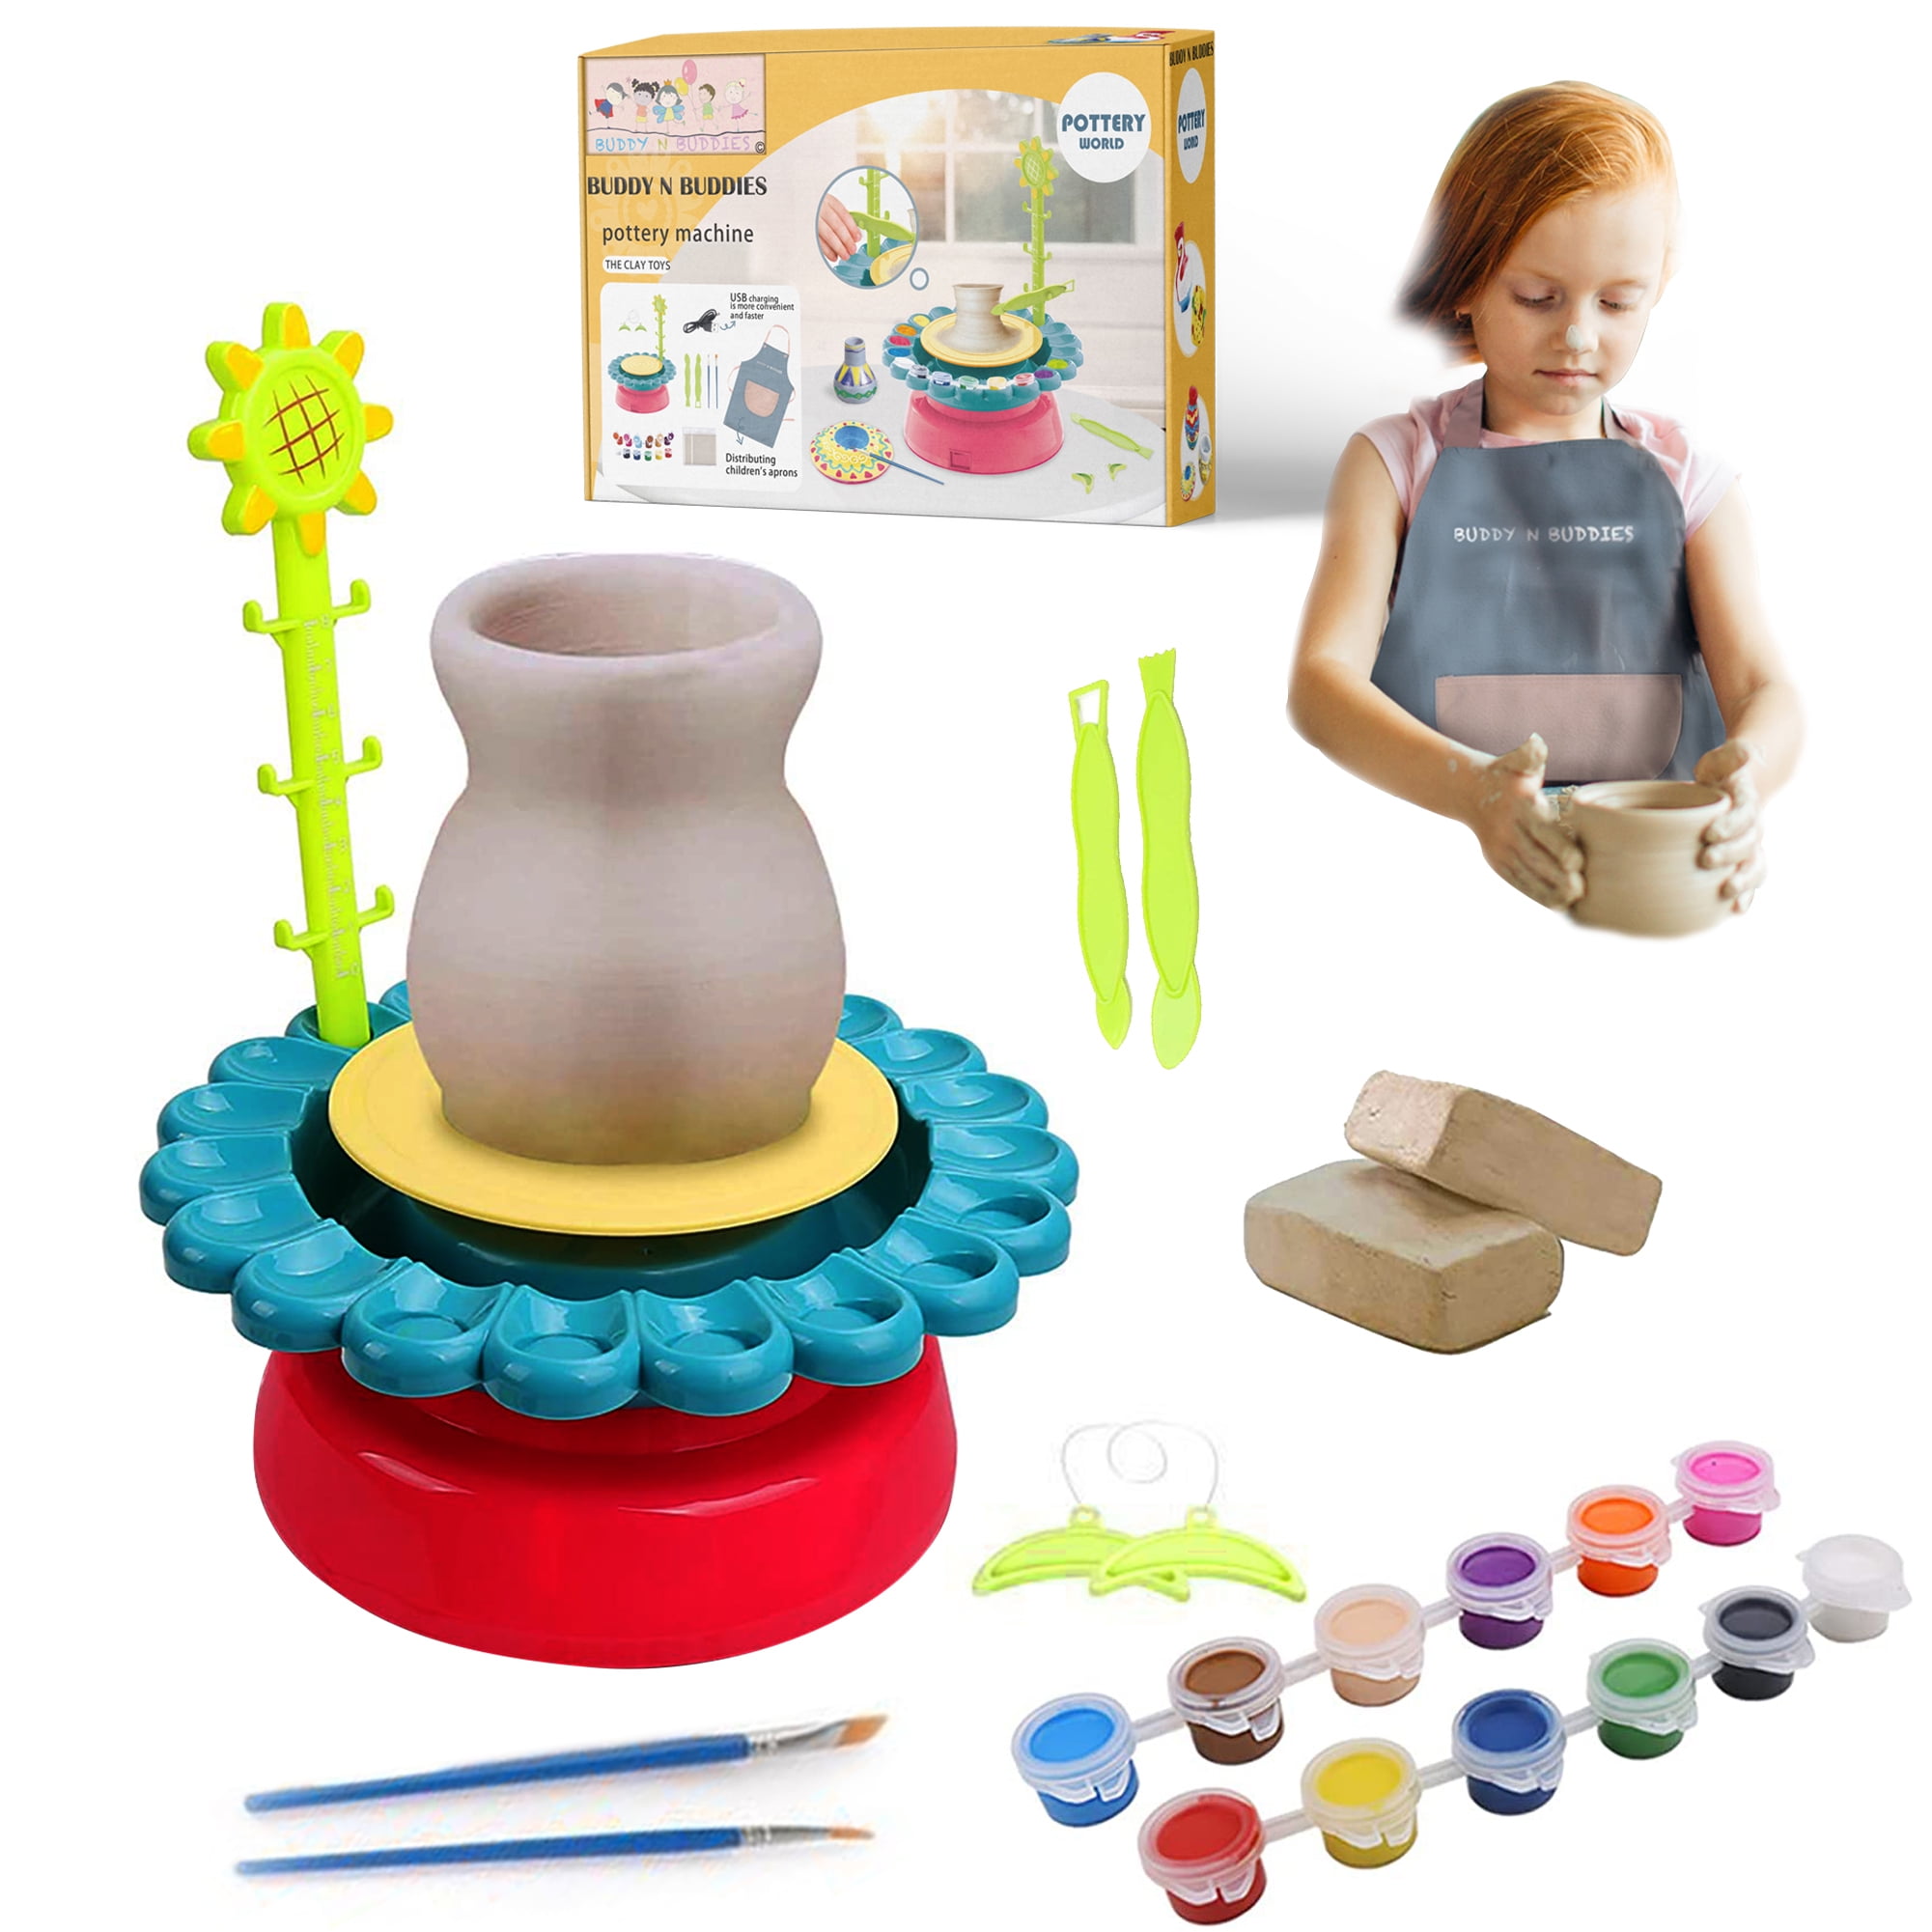 Buddy N Buddies Pottery Studio With USB Charger